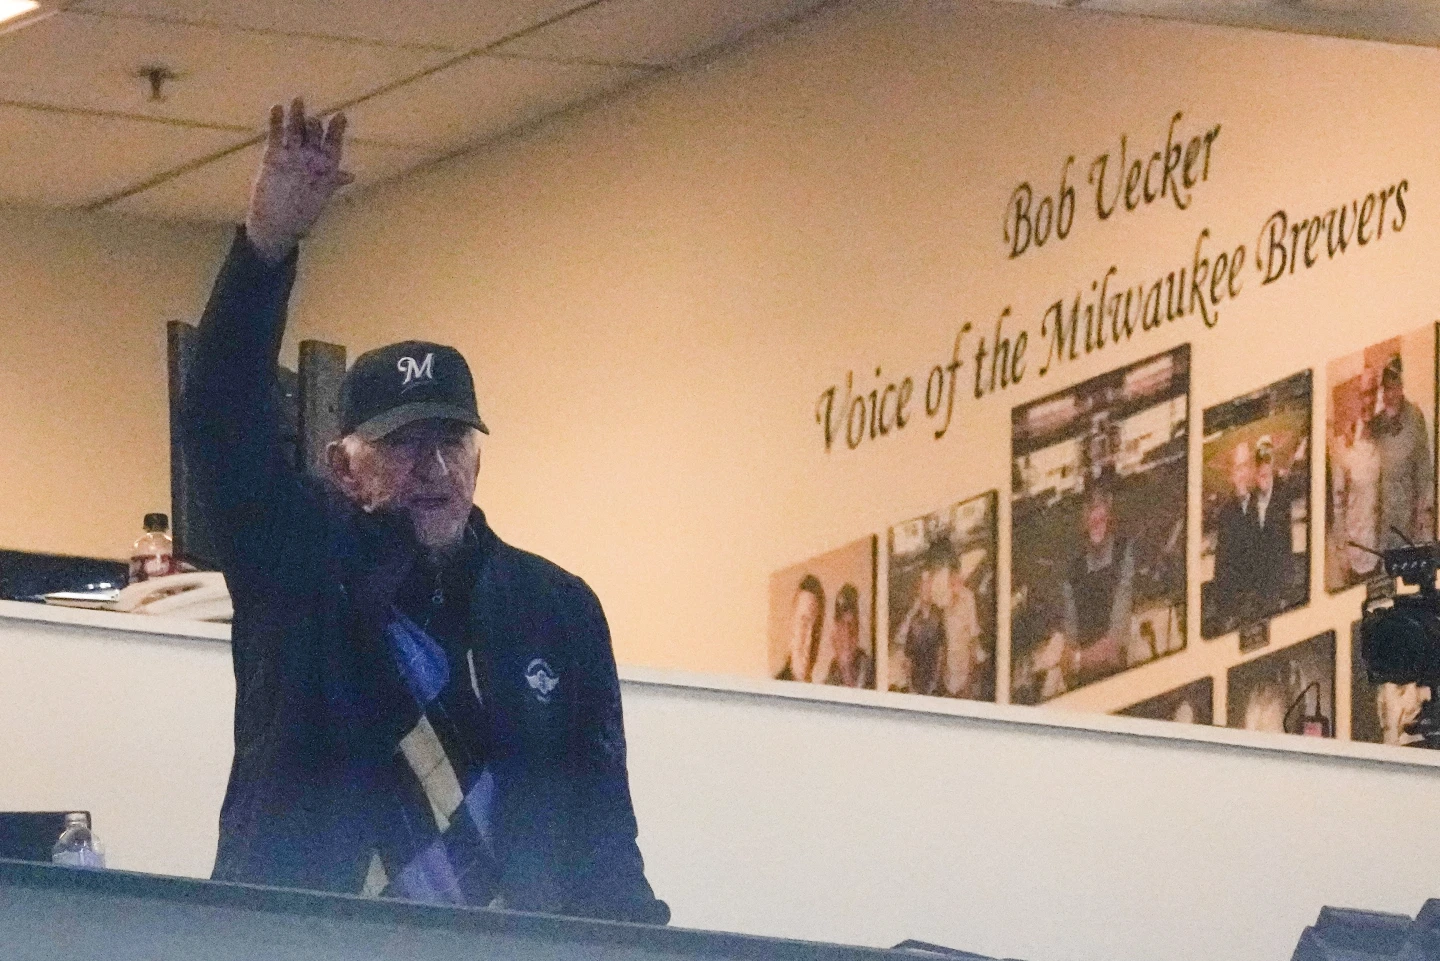 Brewers fans celebrate their ‘Mr. Baseball,’ Bob Uecker, who continues to broadcast games at 90